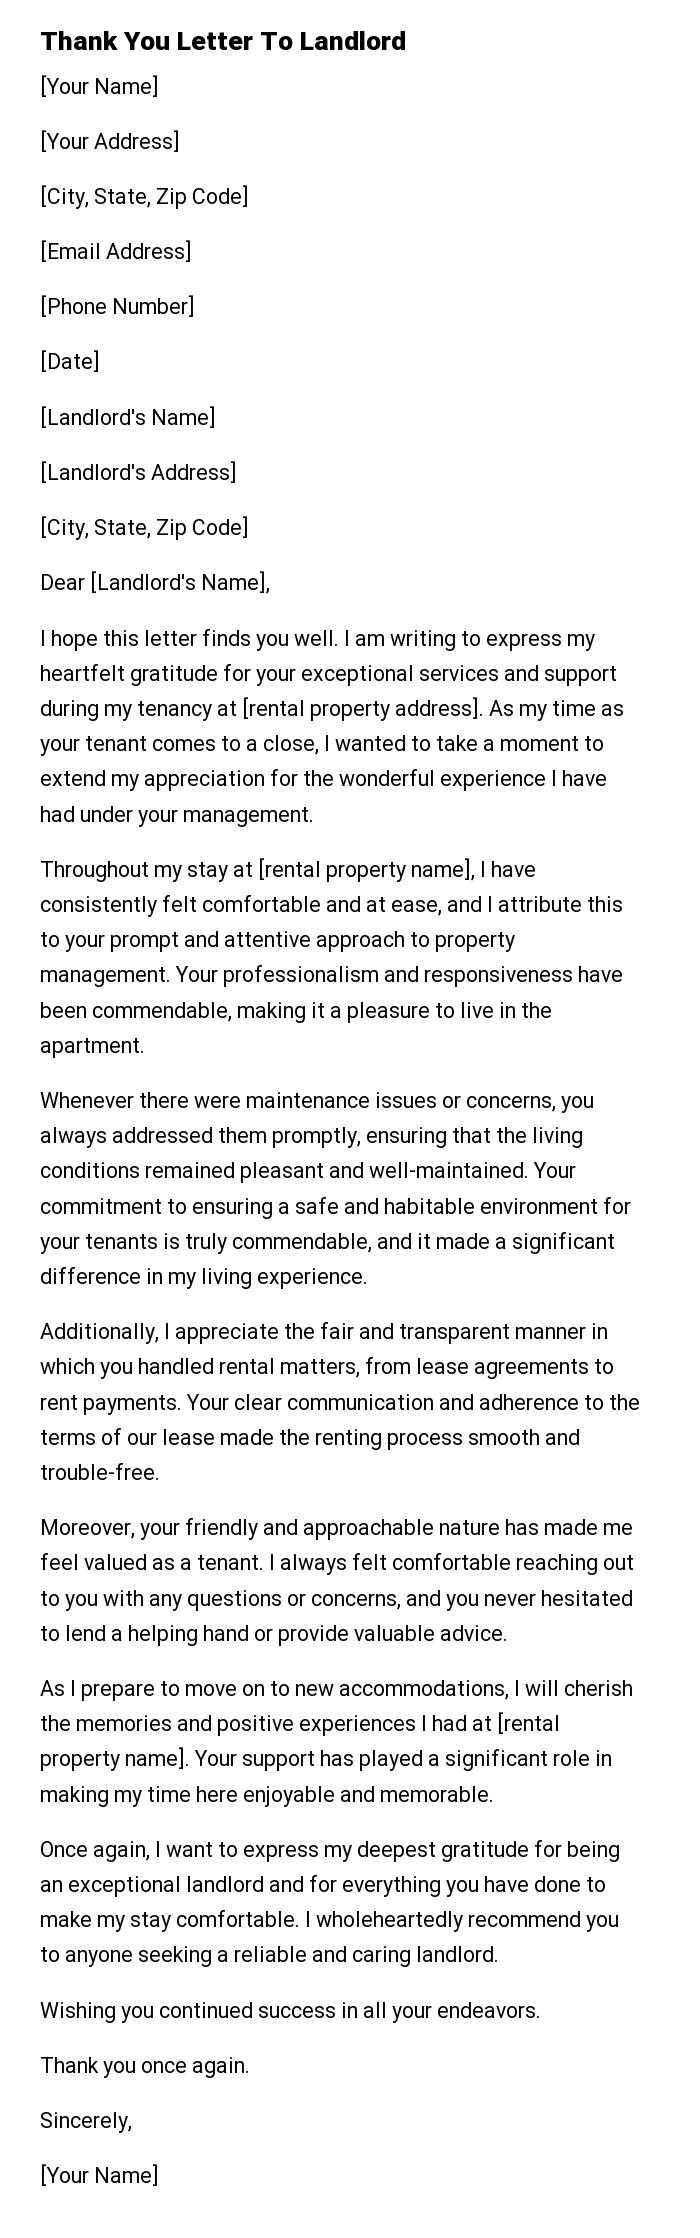 Thank You Letter To Landlord